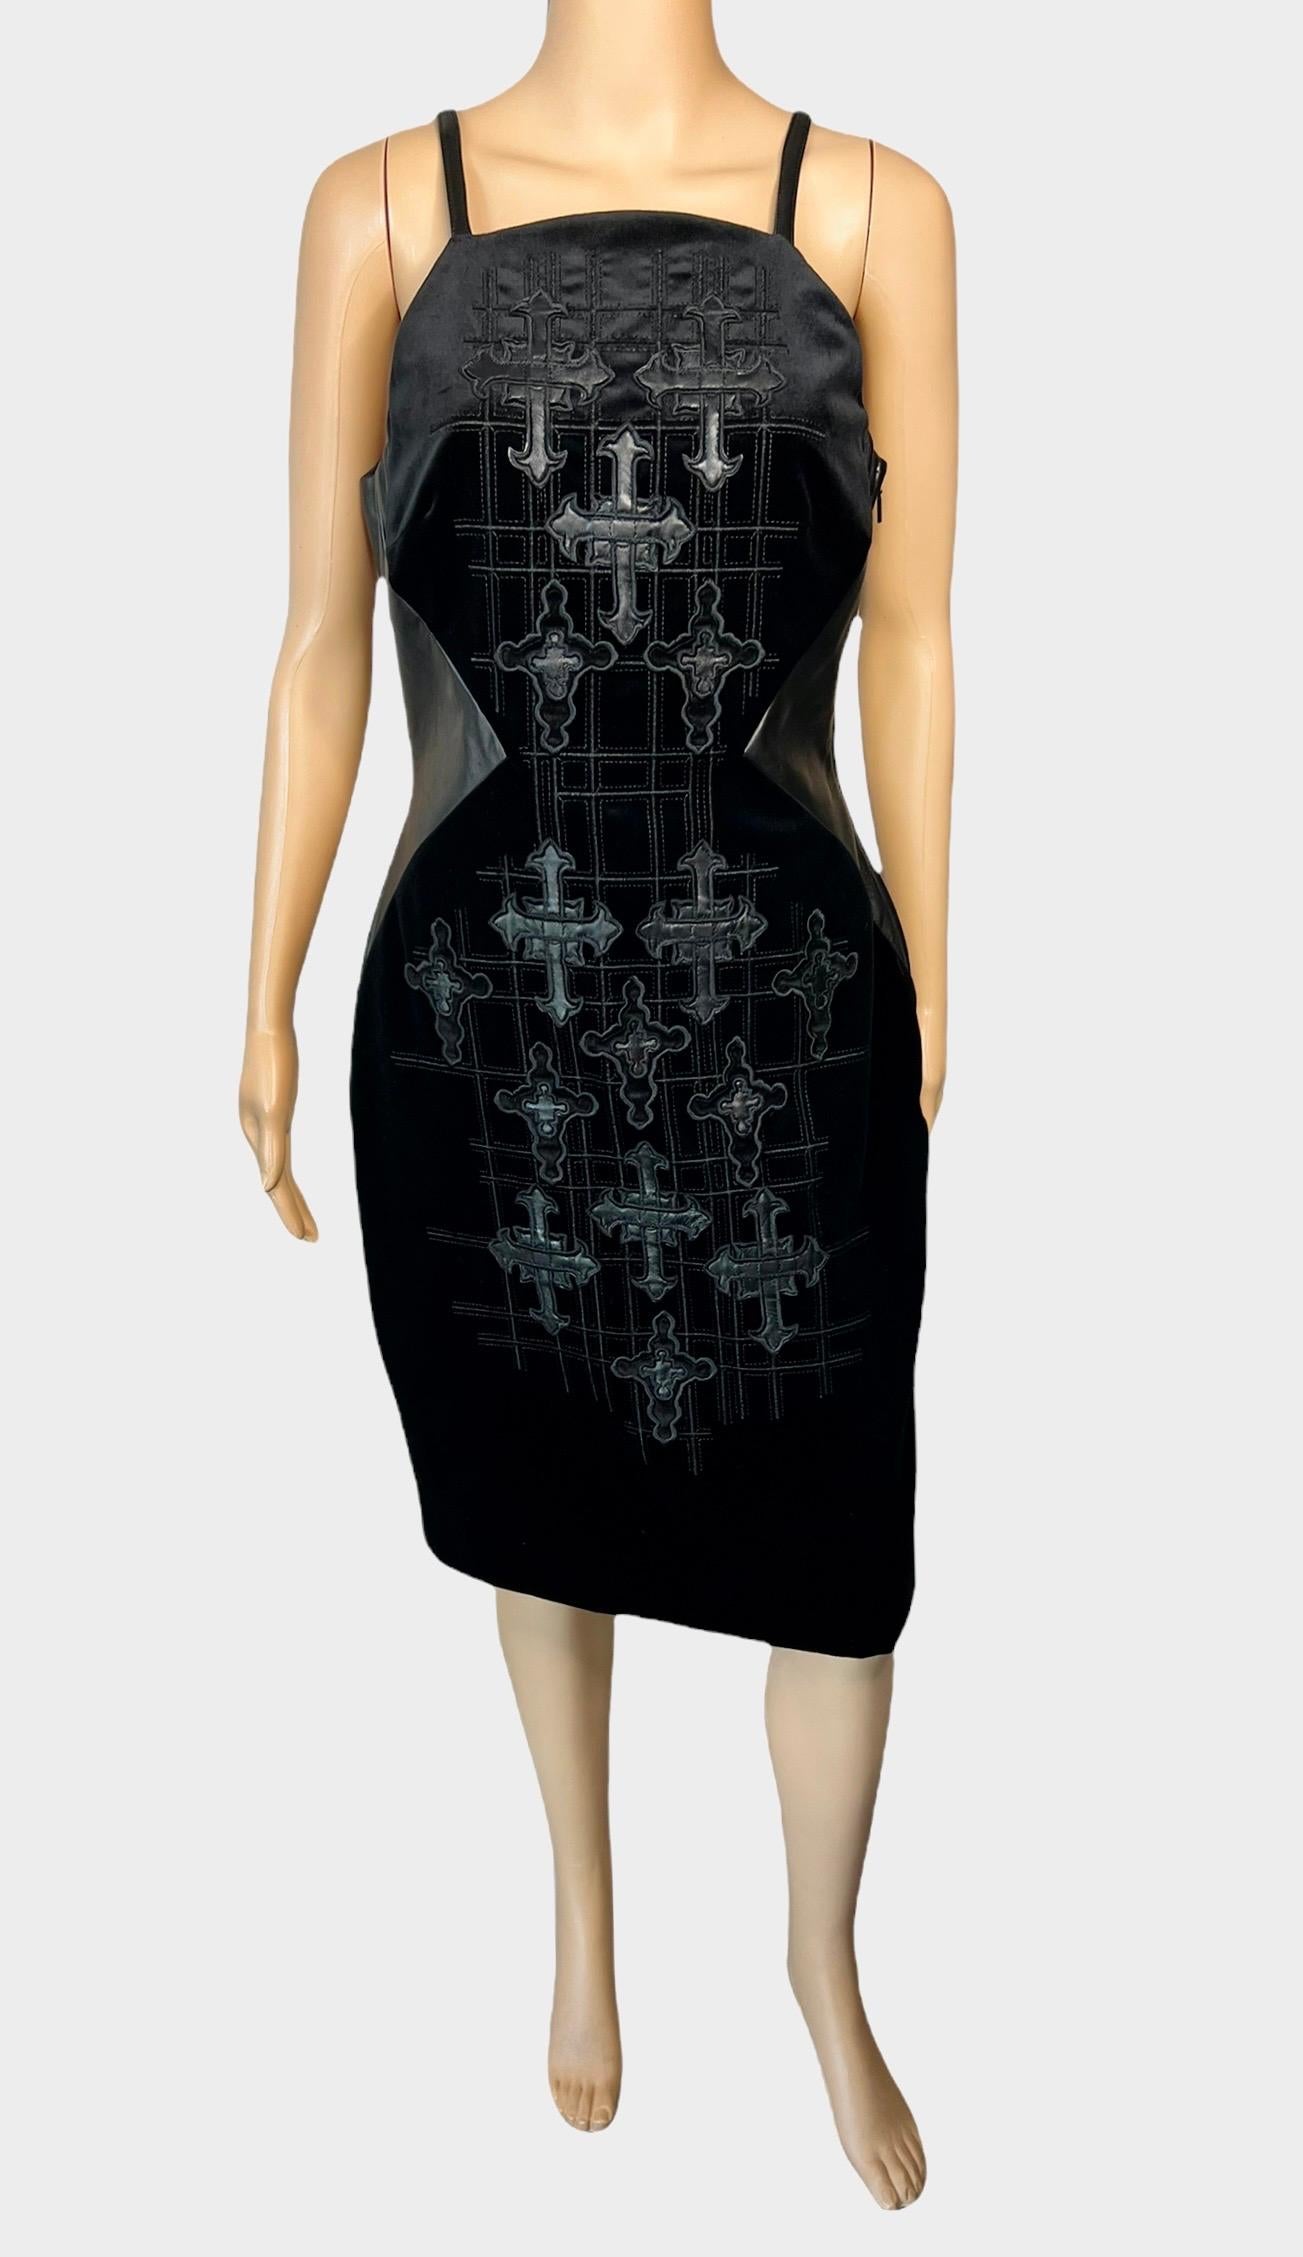 Versace F/W 2012 Runway Unworn Gothic Cross Embroidered Leather Velvet Black Dress IT 44

Look 2 from the Spring 2012 Collection.

New with Tags